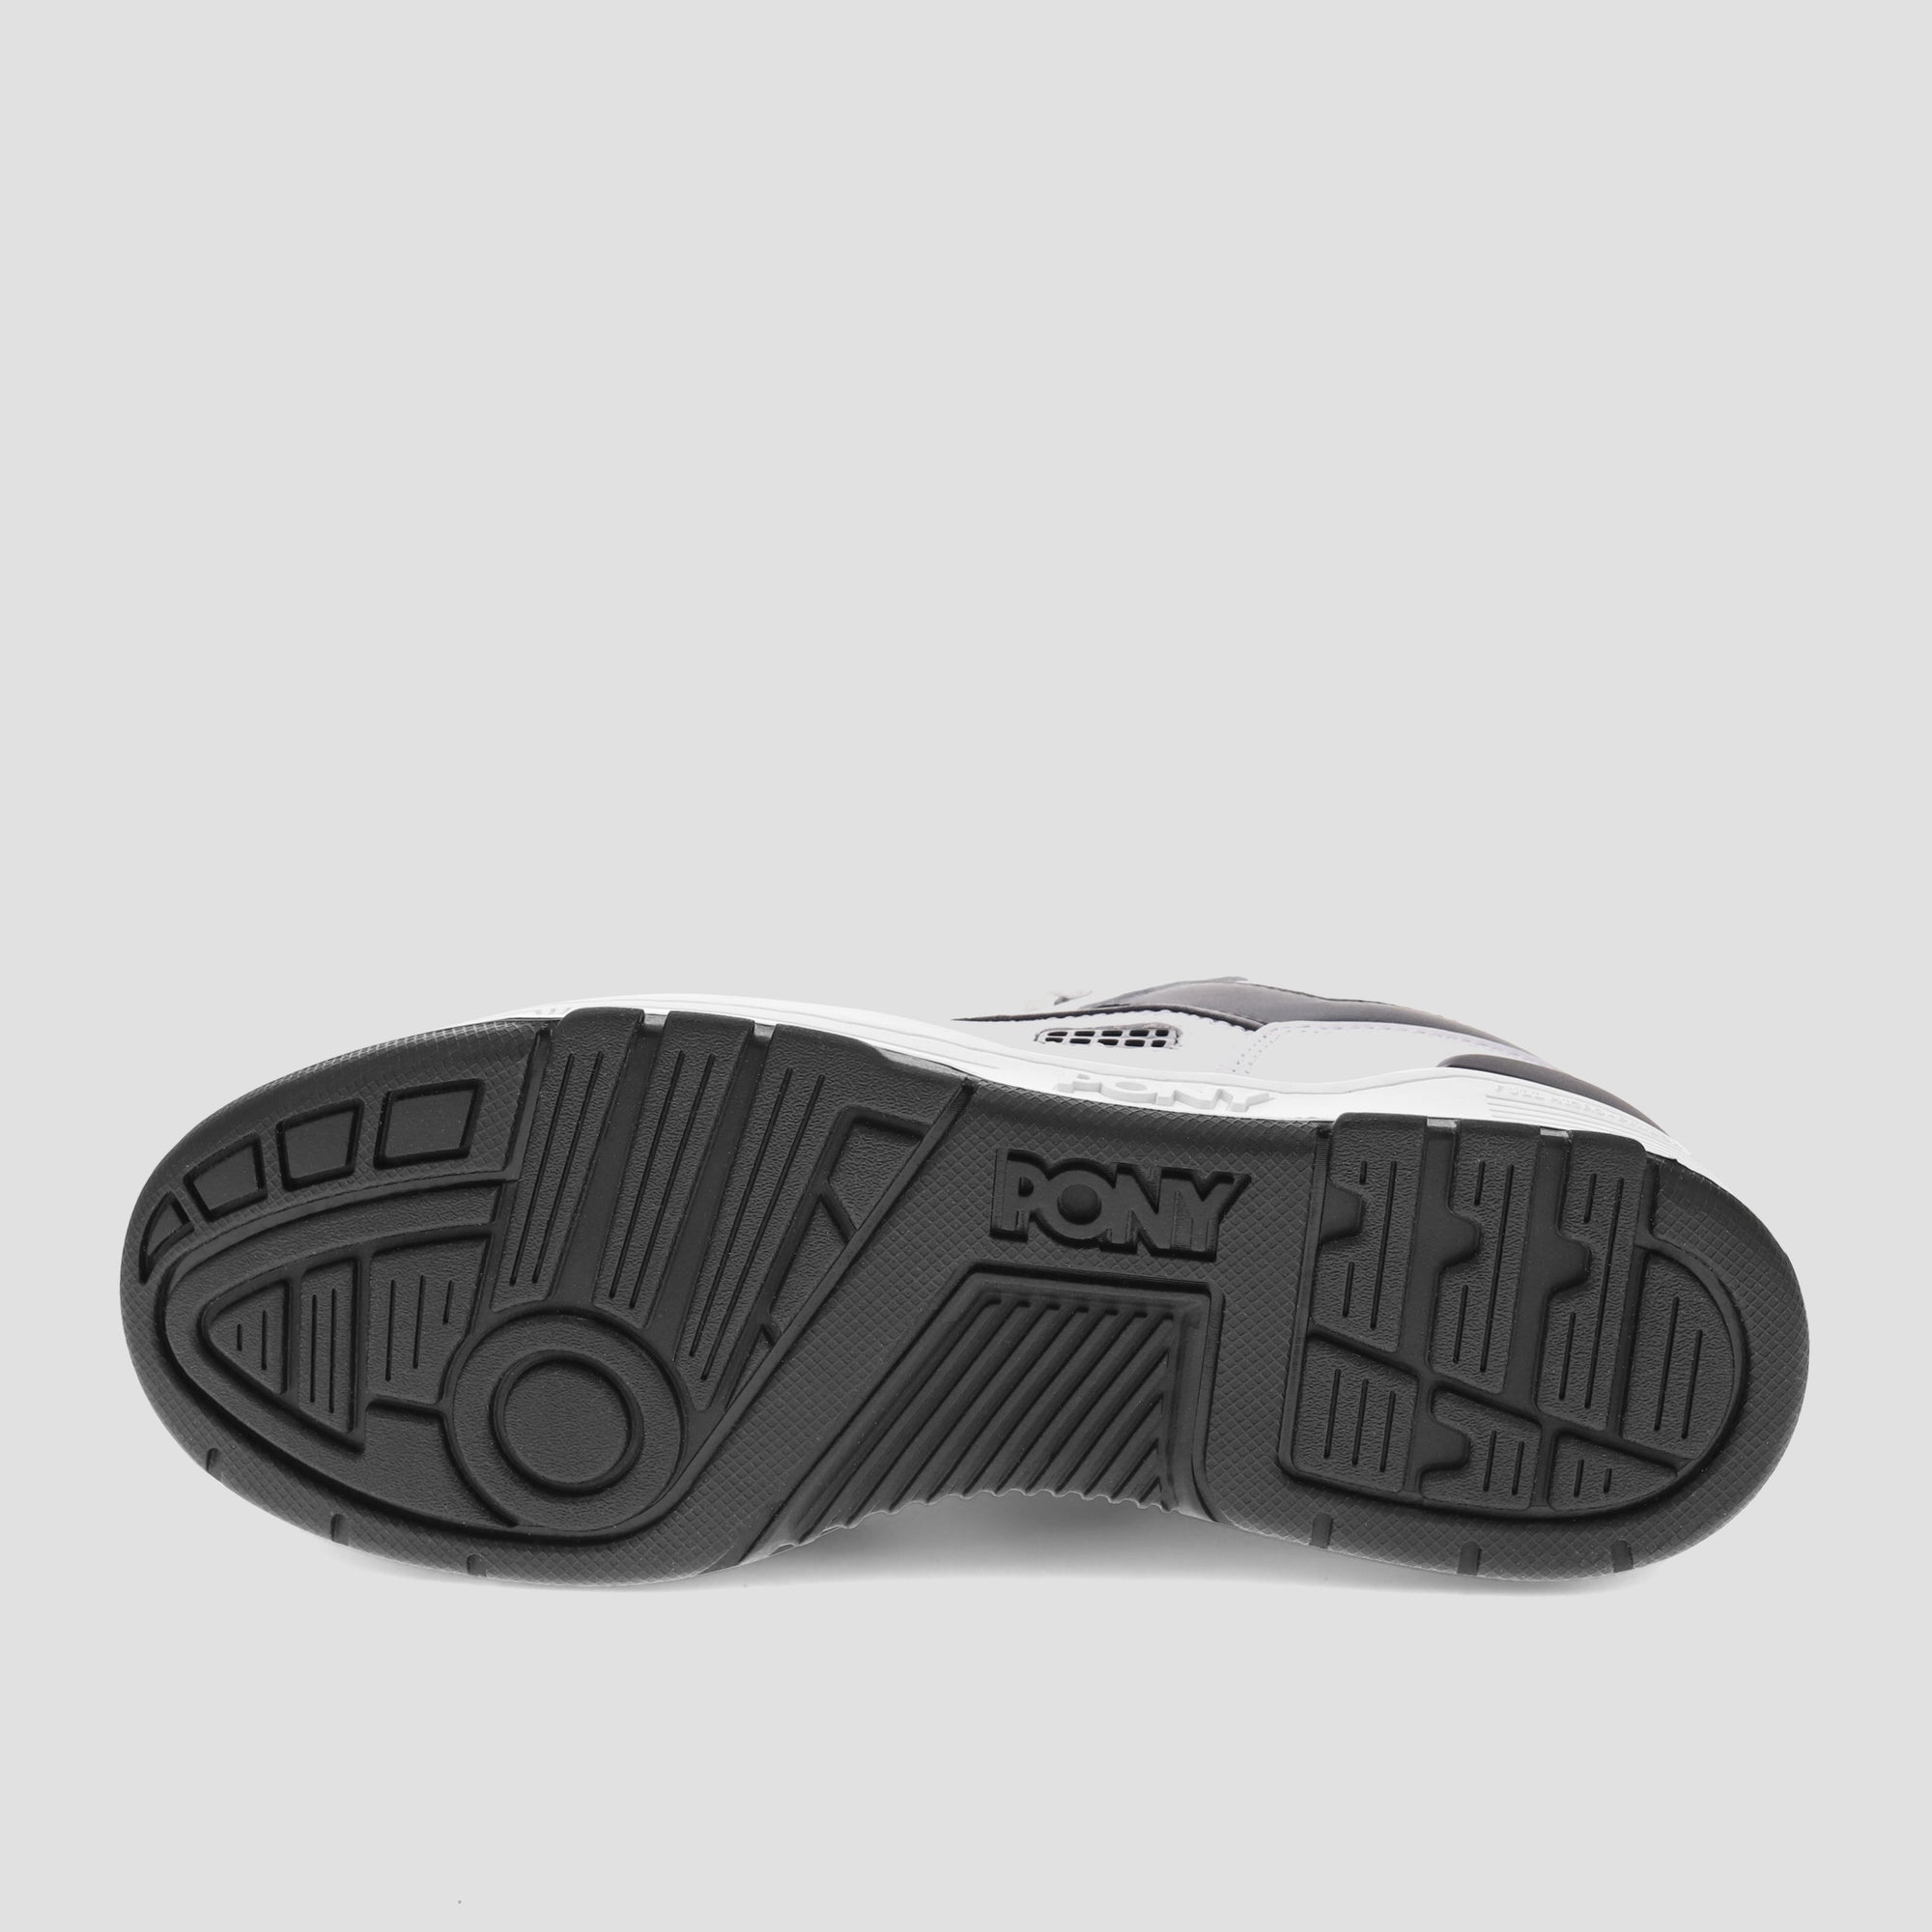 A shot of the black sole of a low-top white and black M-100 sneaker